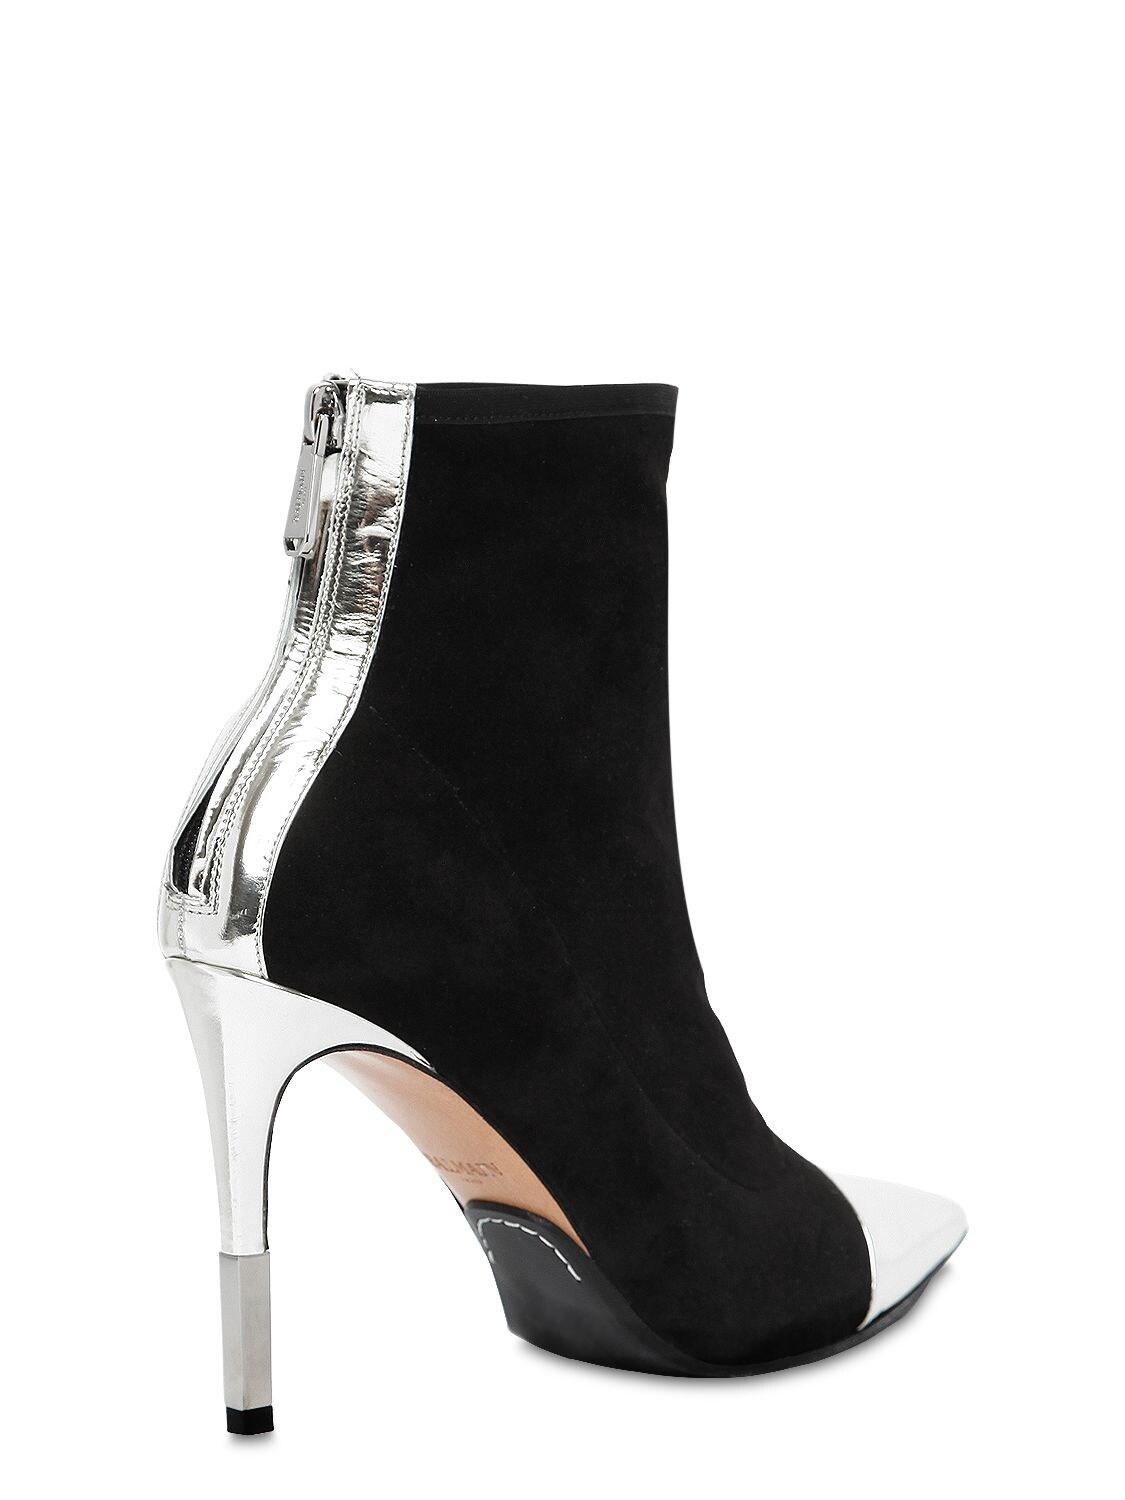 Balmain Leather 110mm Blair Suede & Metallic Ankle Boots in Black ...